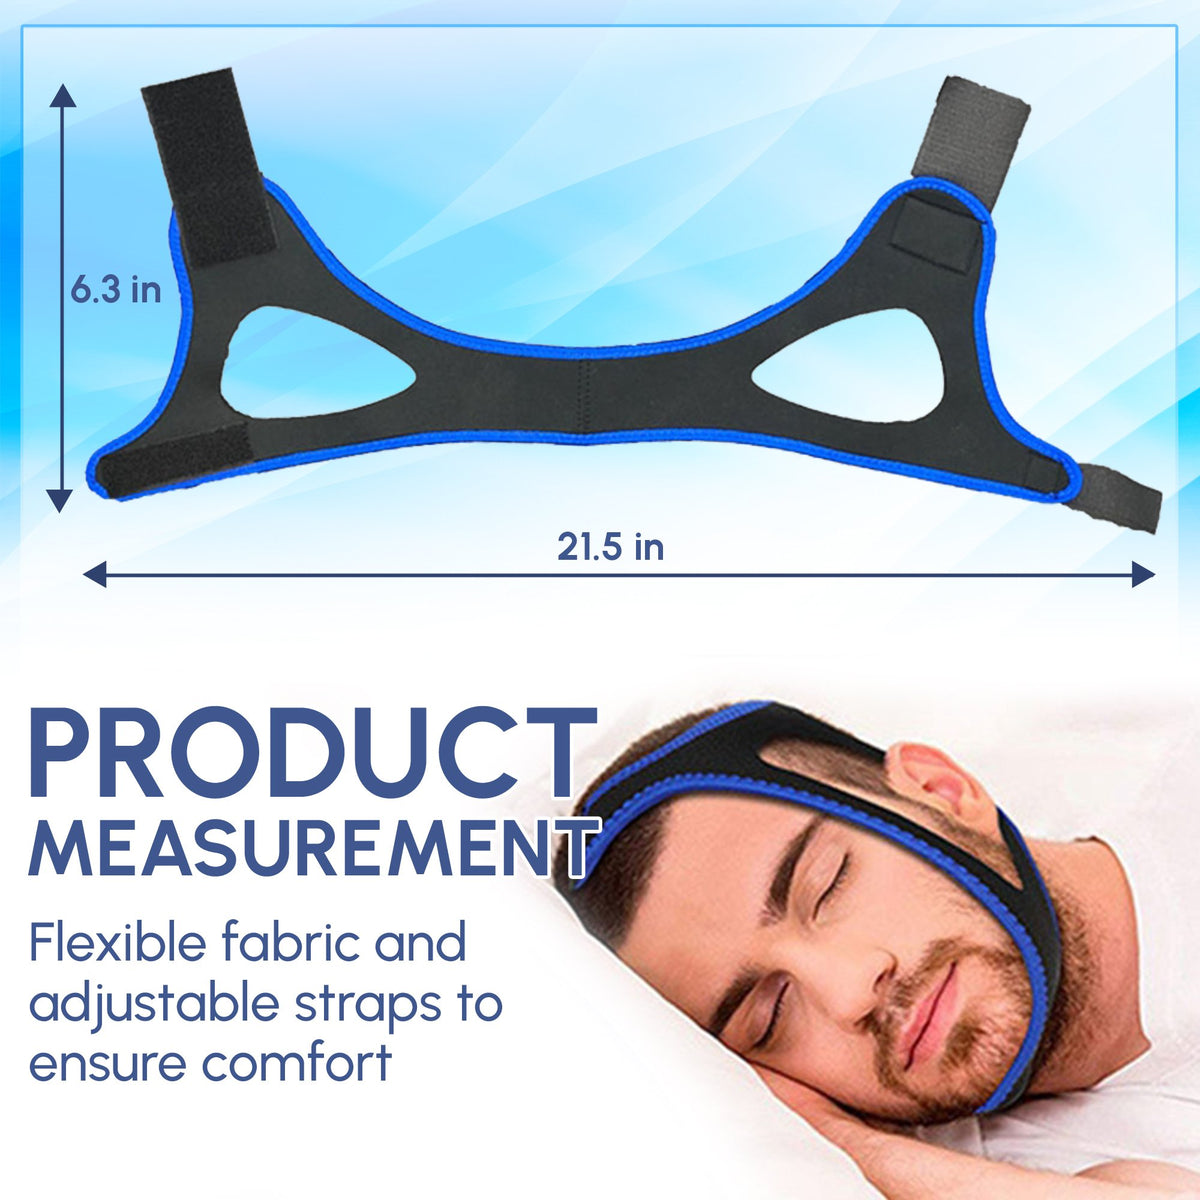 Adjustable Anti Snore Chin Strap - Effective Snoring Solution - Breathable CPAP Alternative - Unisex, Adjustable, Sleep Apnea Aid - Chin Strap for Snoring